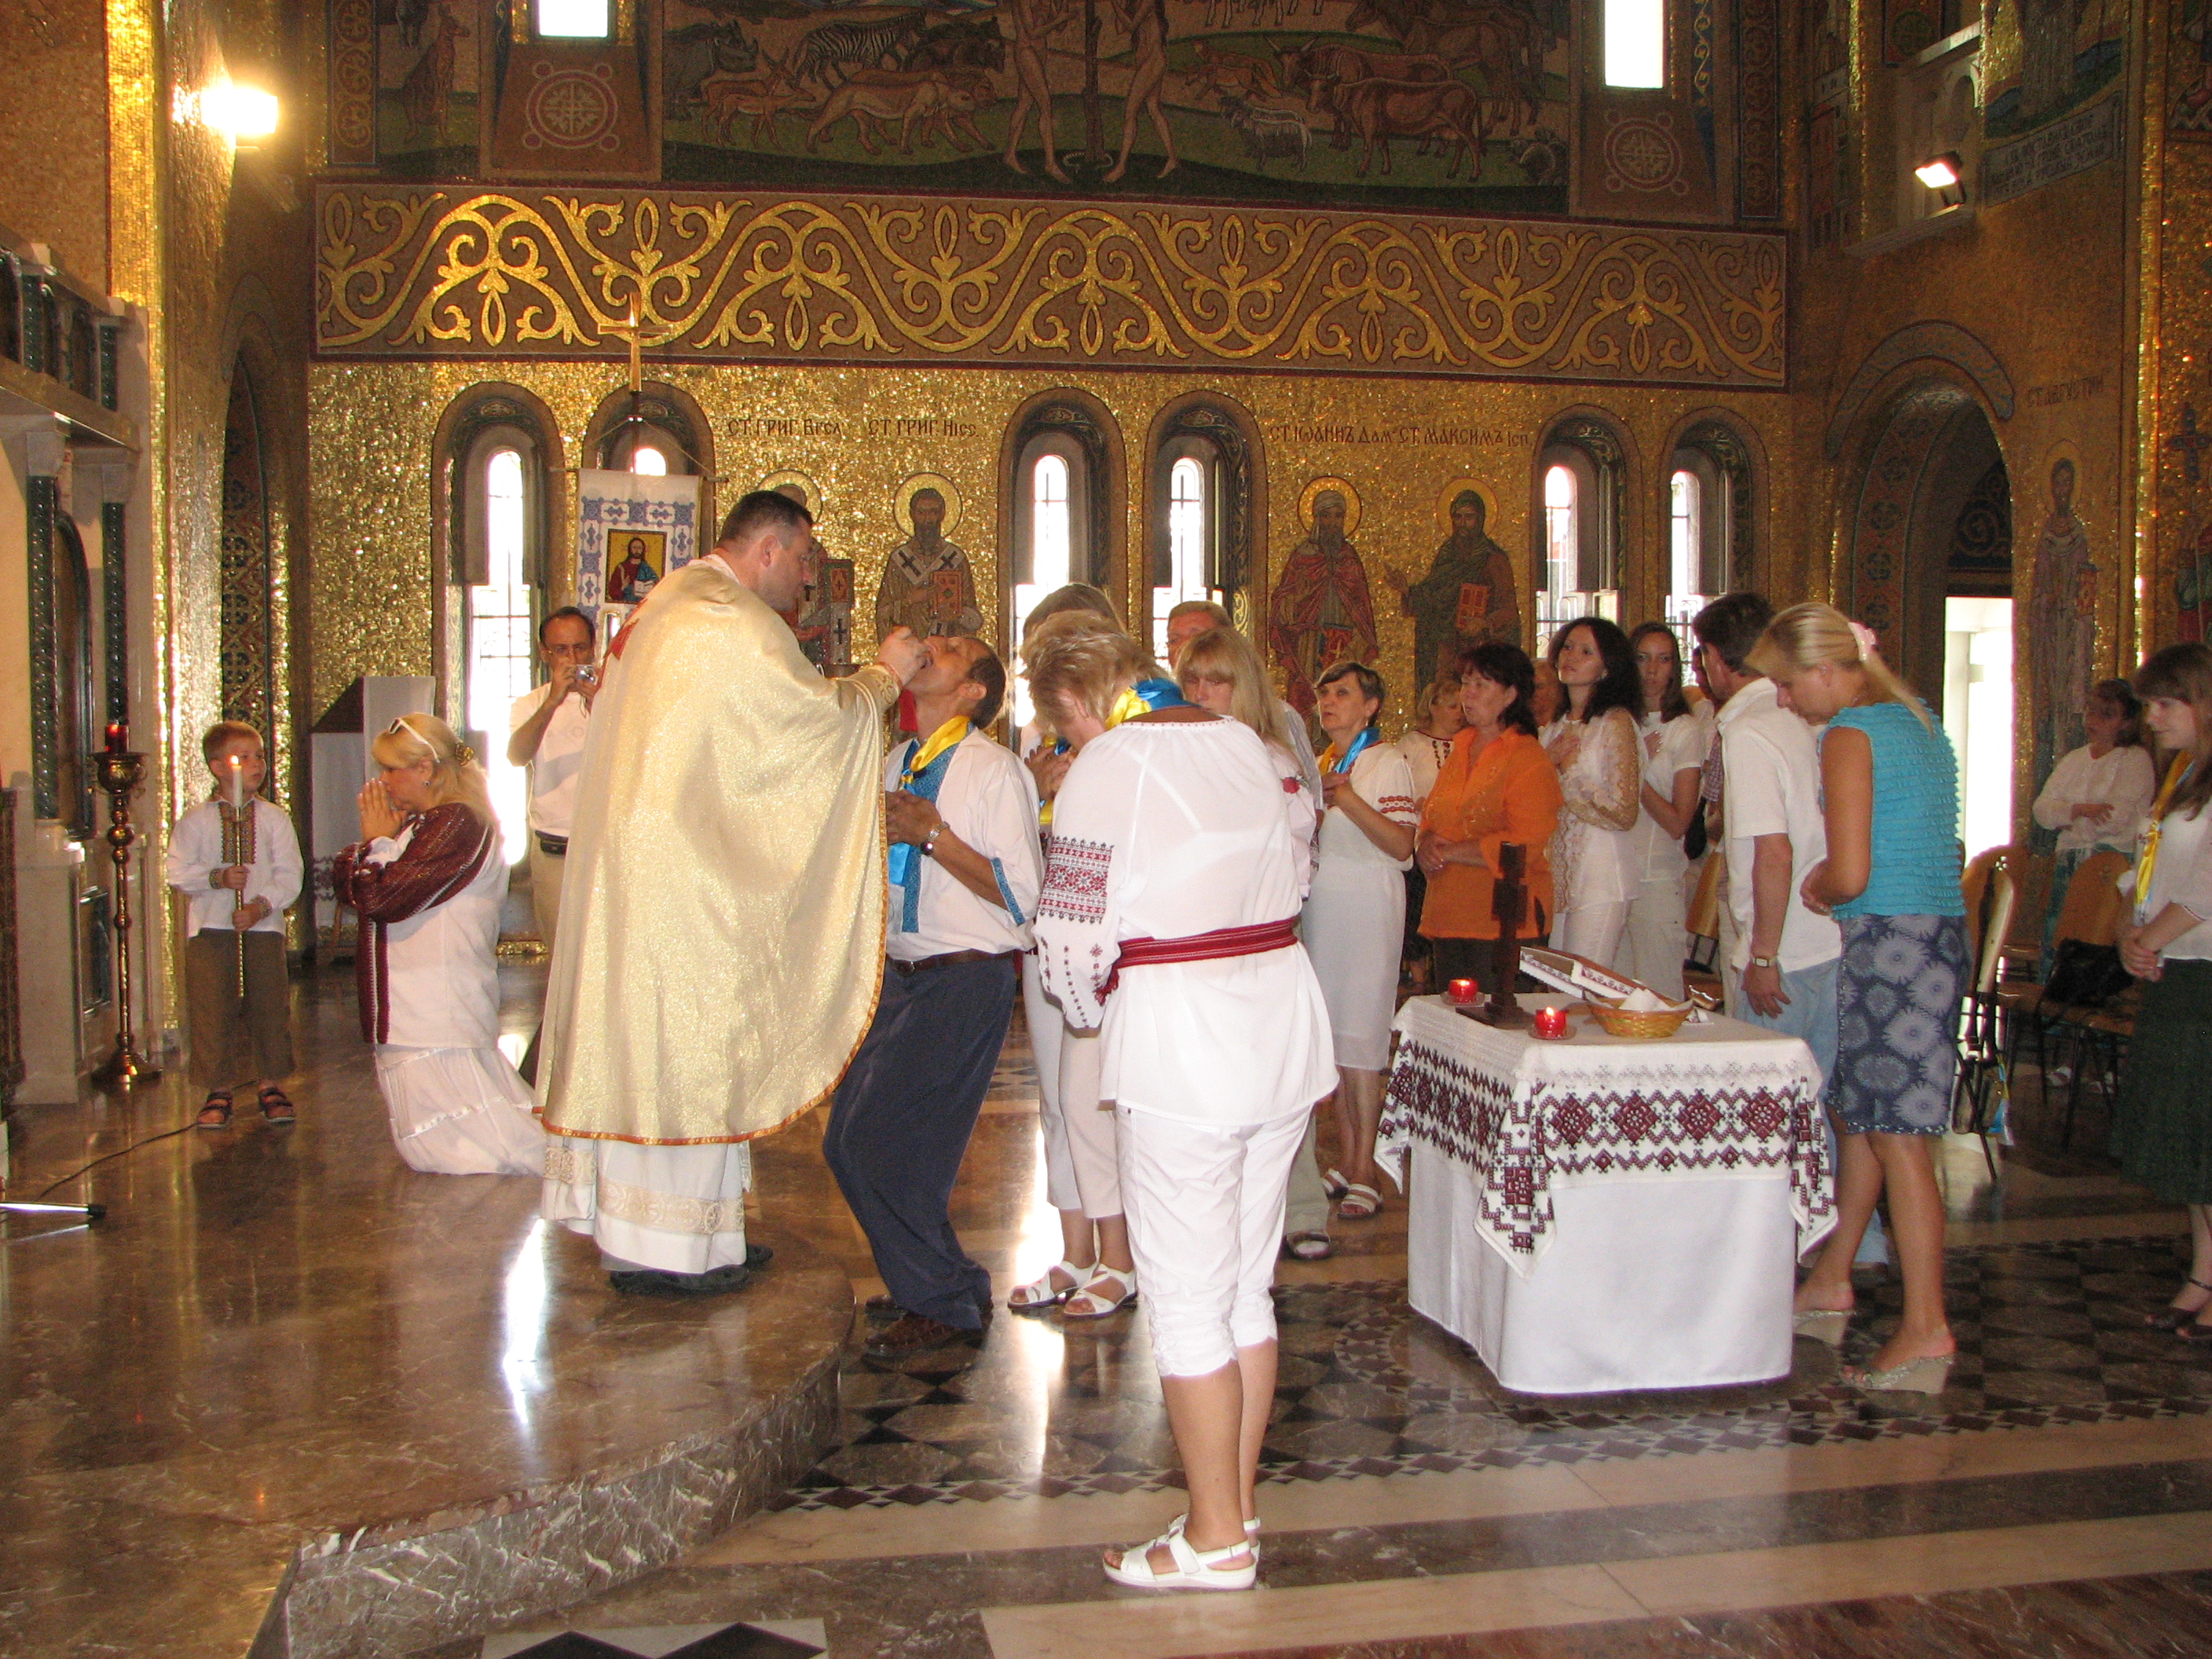 People are taking the Holy Communion in a Greek-Catholic Church in Rome, Italy, European Union, August 2011, picture 17.